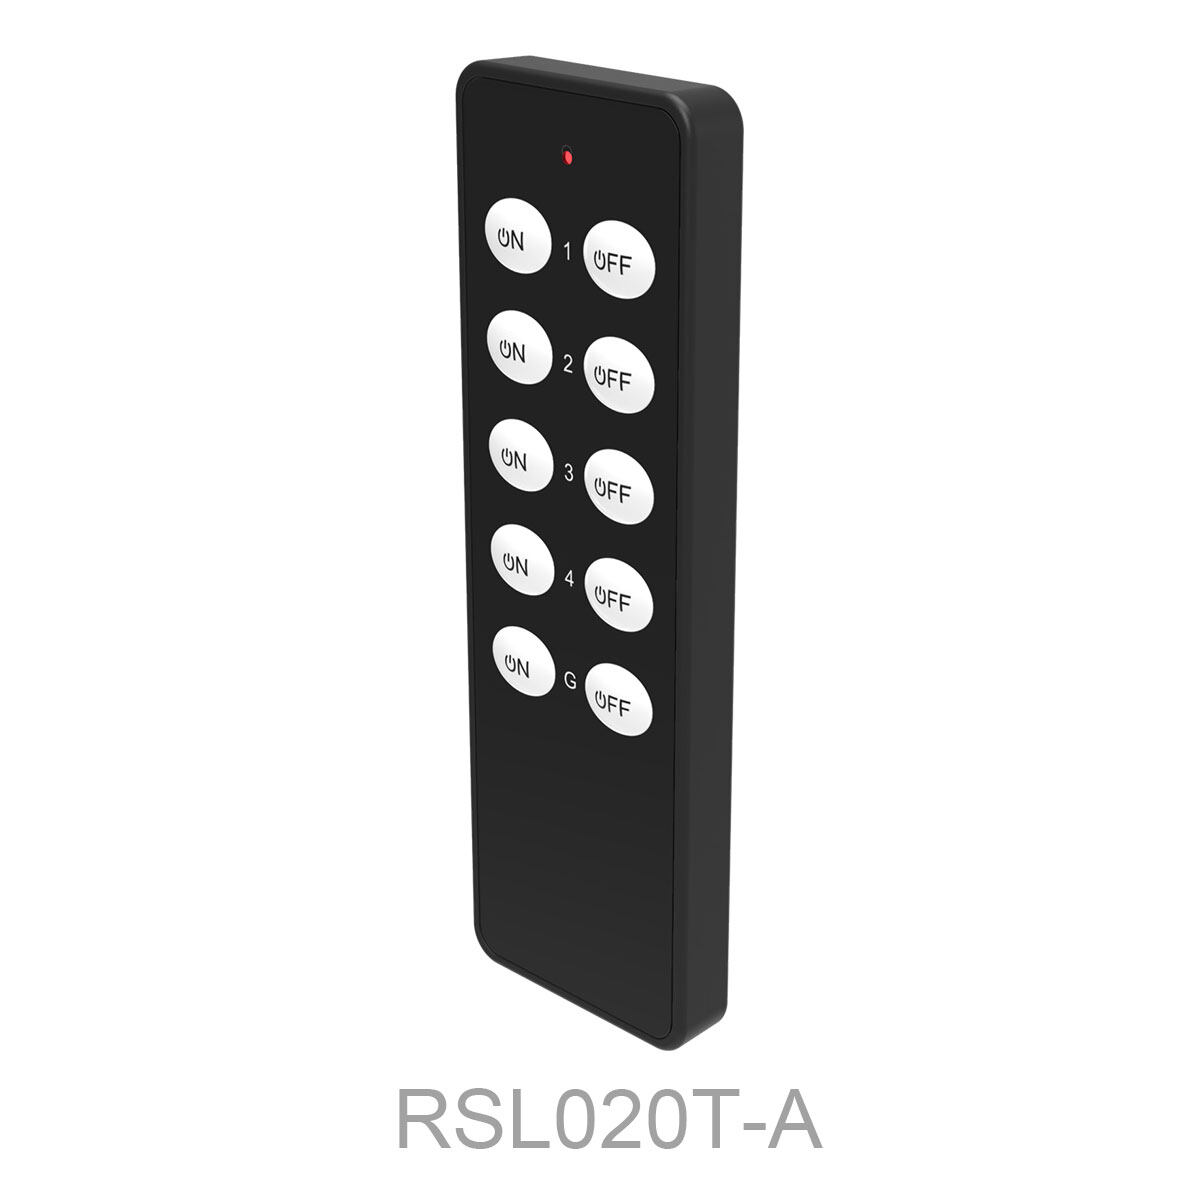 Remote Control Transmitter RSL020T